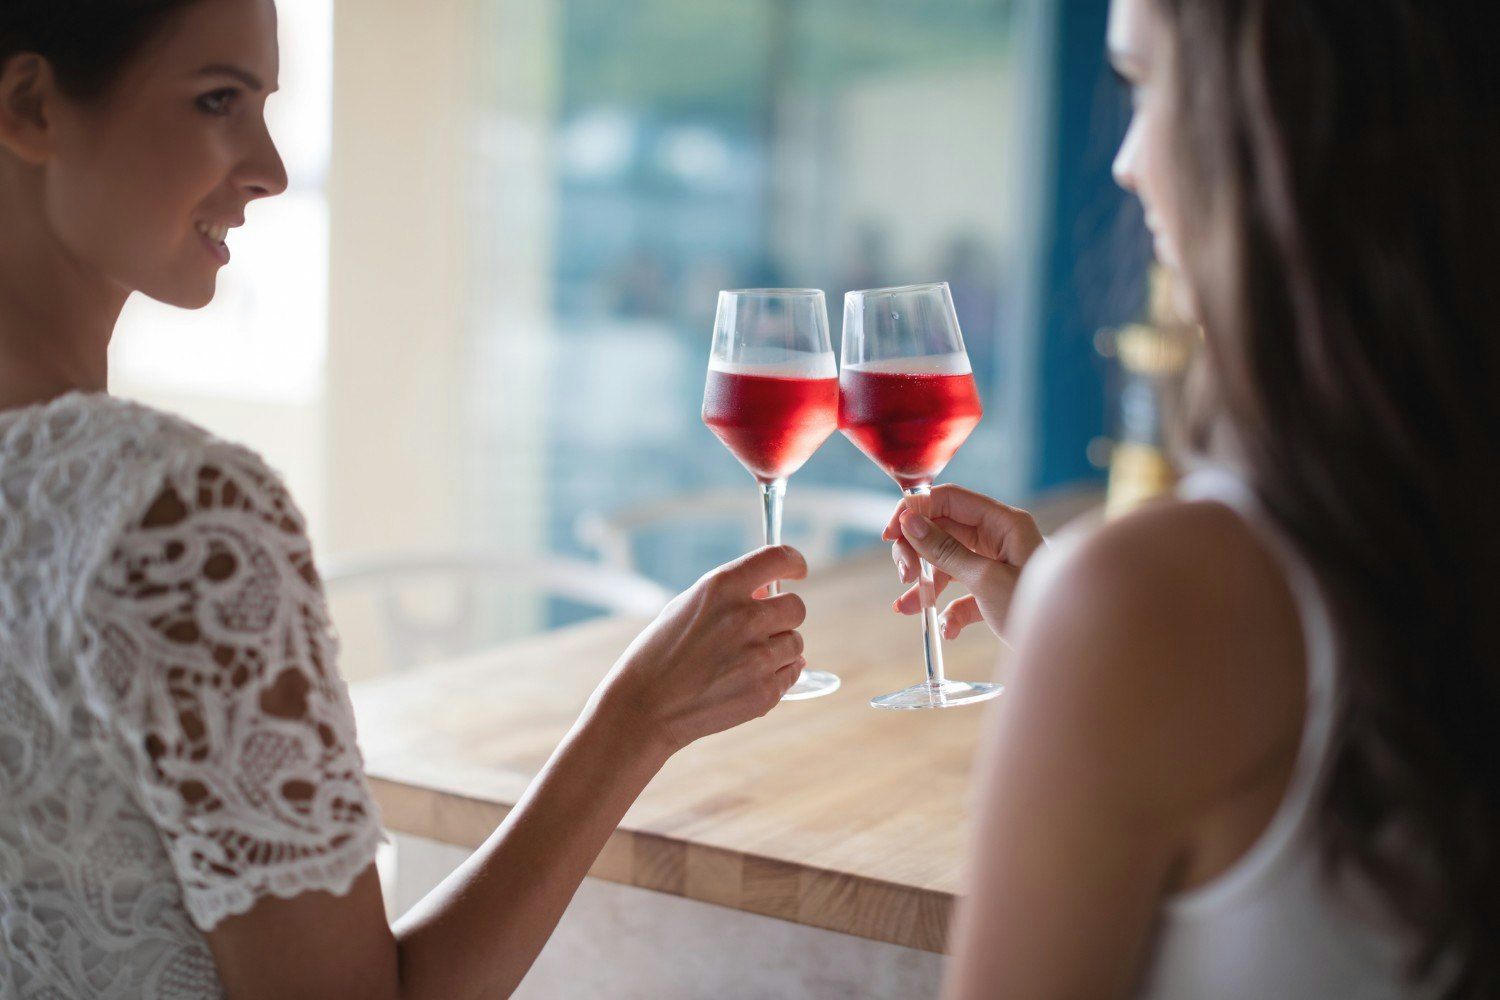 Women toasting with rose wine in restaurant